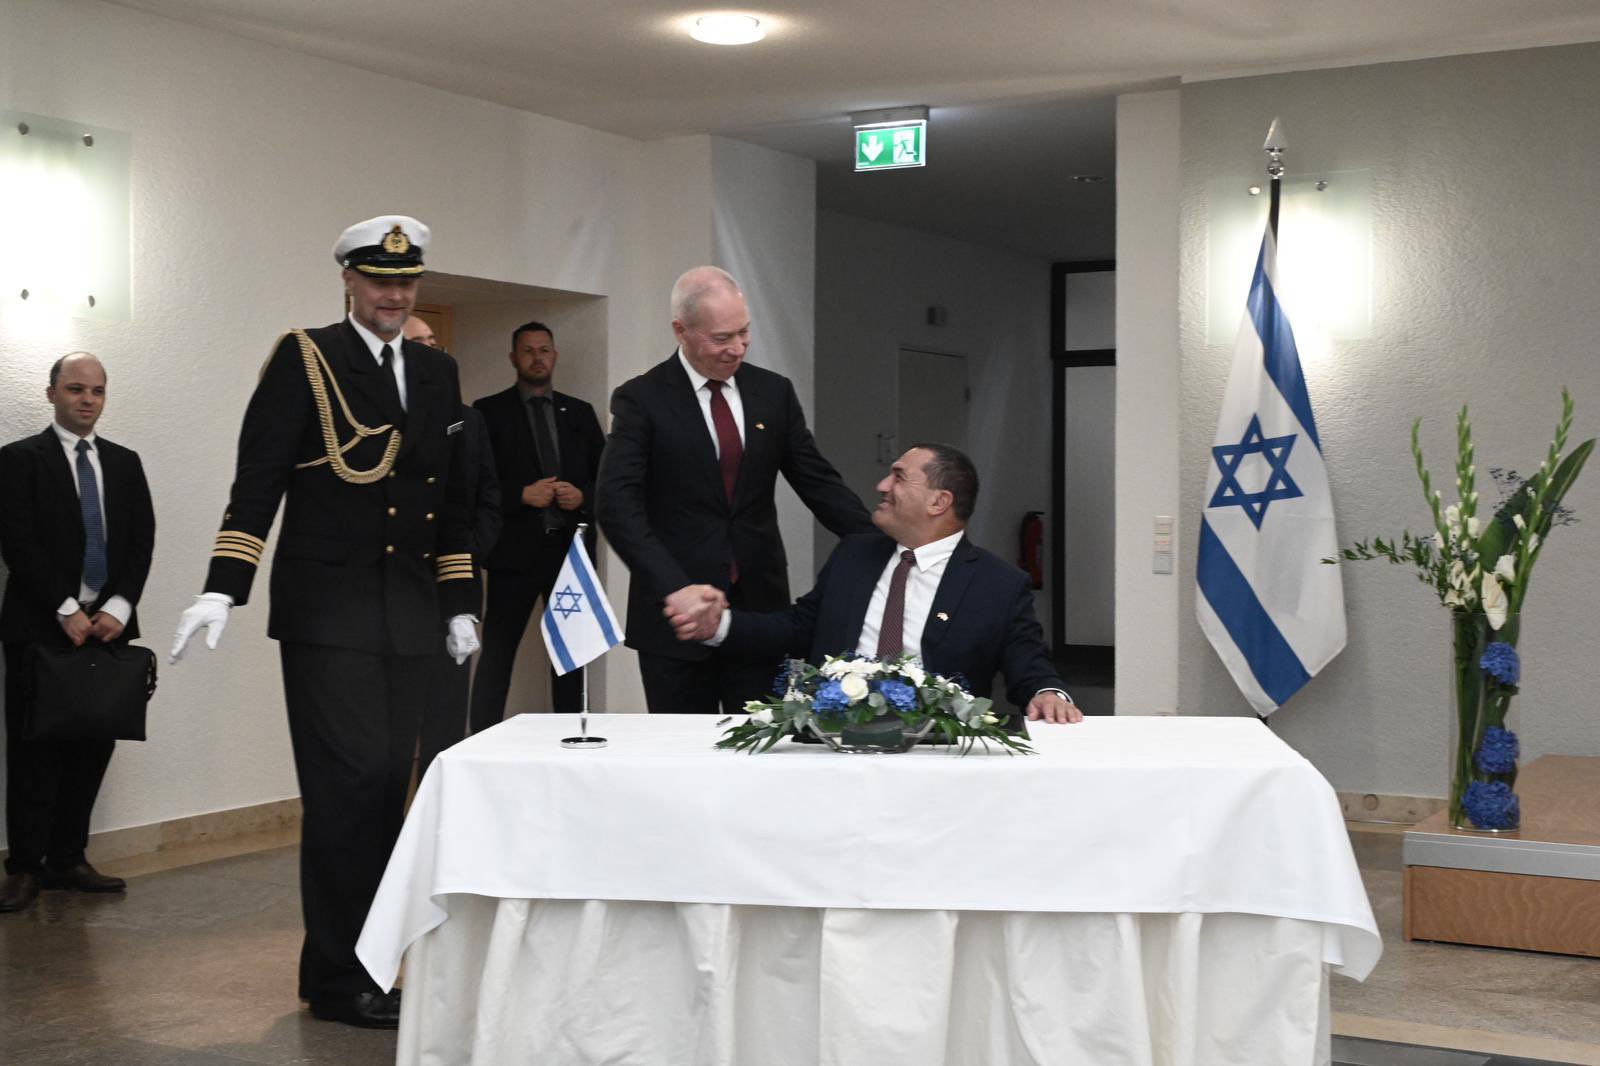  The Israeli and German ministries of defense have signed an historic agreement to initiate the sale of the Arrow 3 Missile Defense System for $3.5 billion.